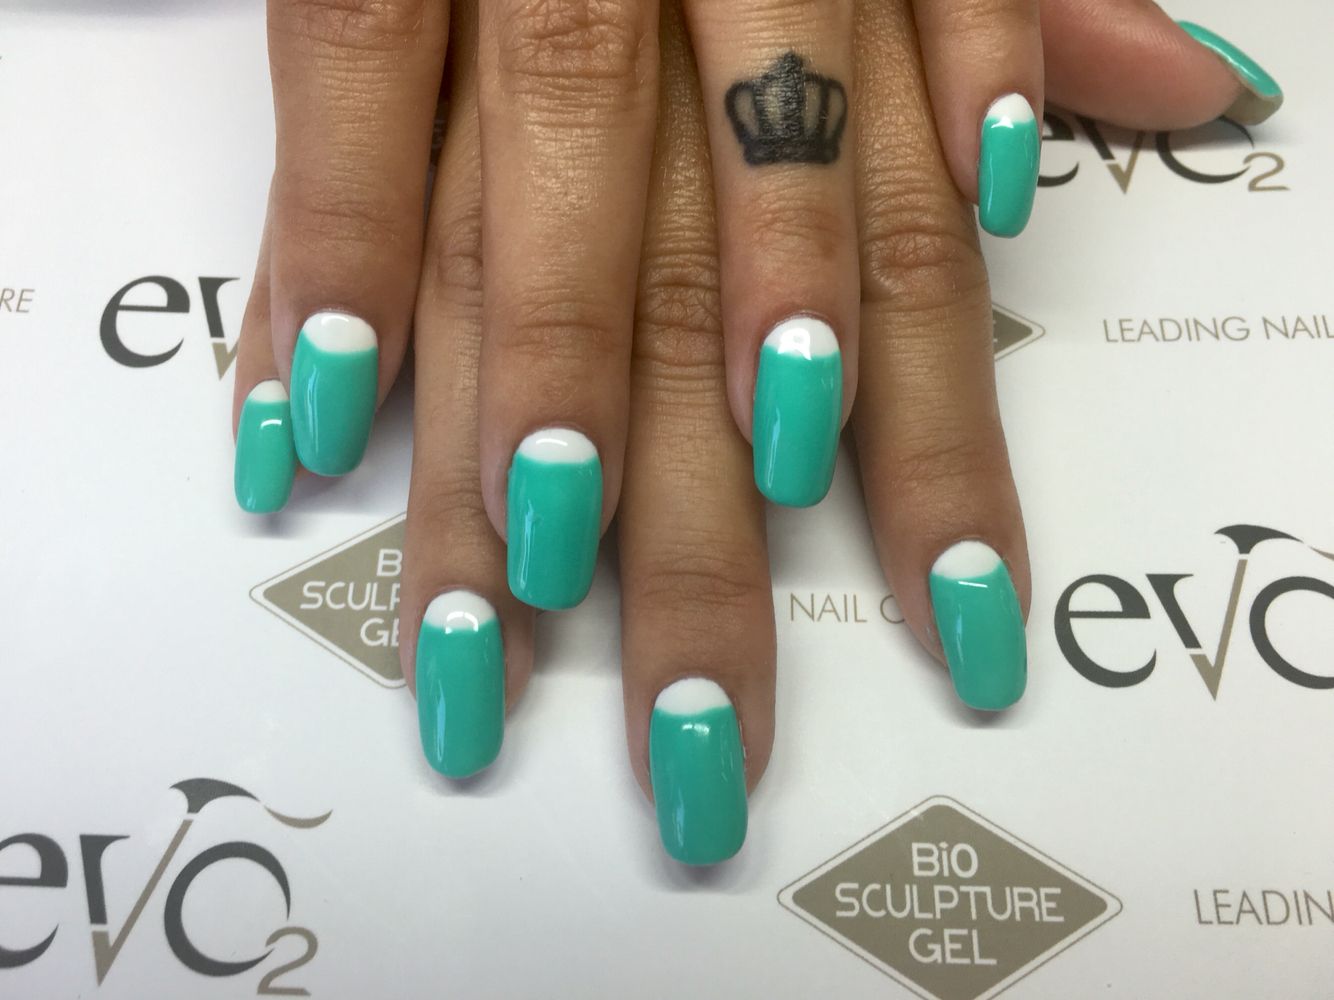 Evo By Bio Sculpture Gel Colours Whitney And Juanel Reverse Manicure Bio Sculpture Gel Reverse Manicure Bio Sculpture